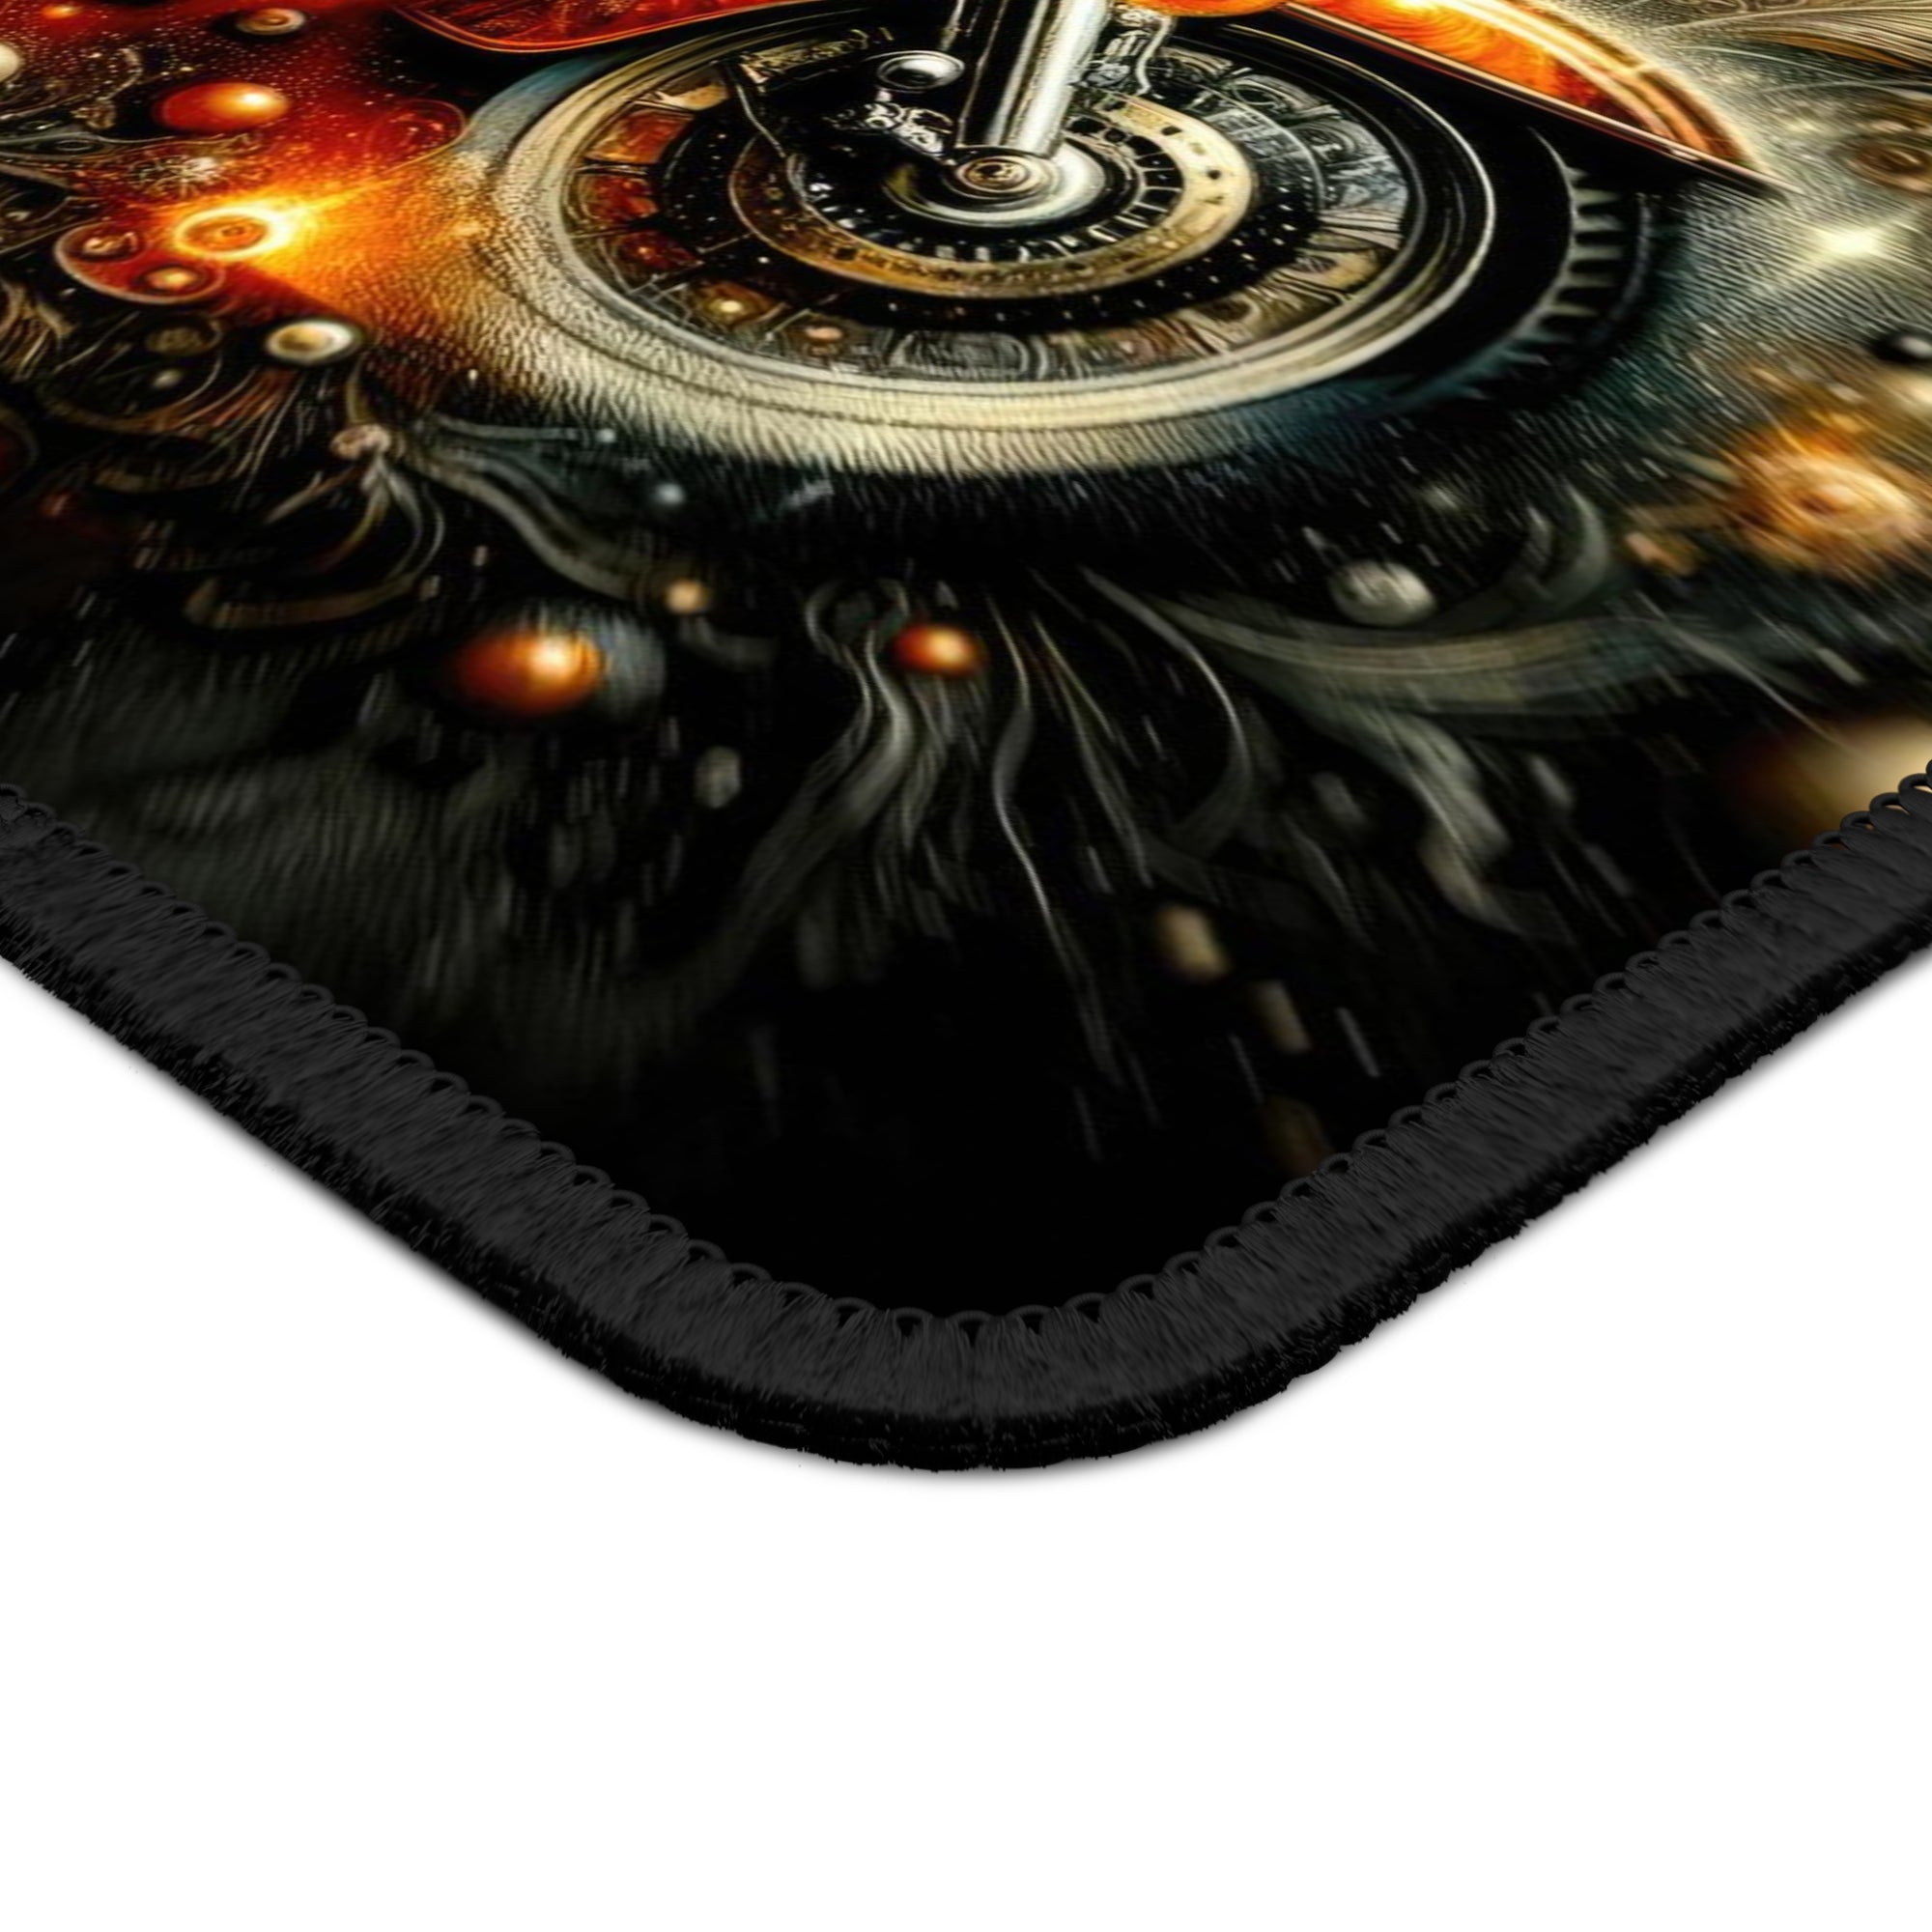 Cosmic Rider Gaming Mouse Pad